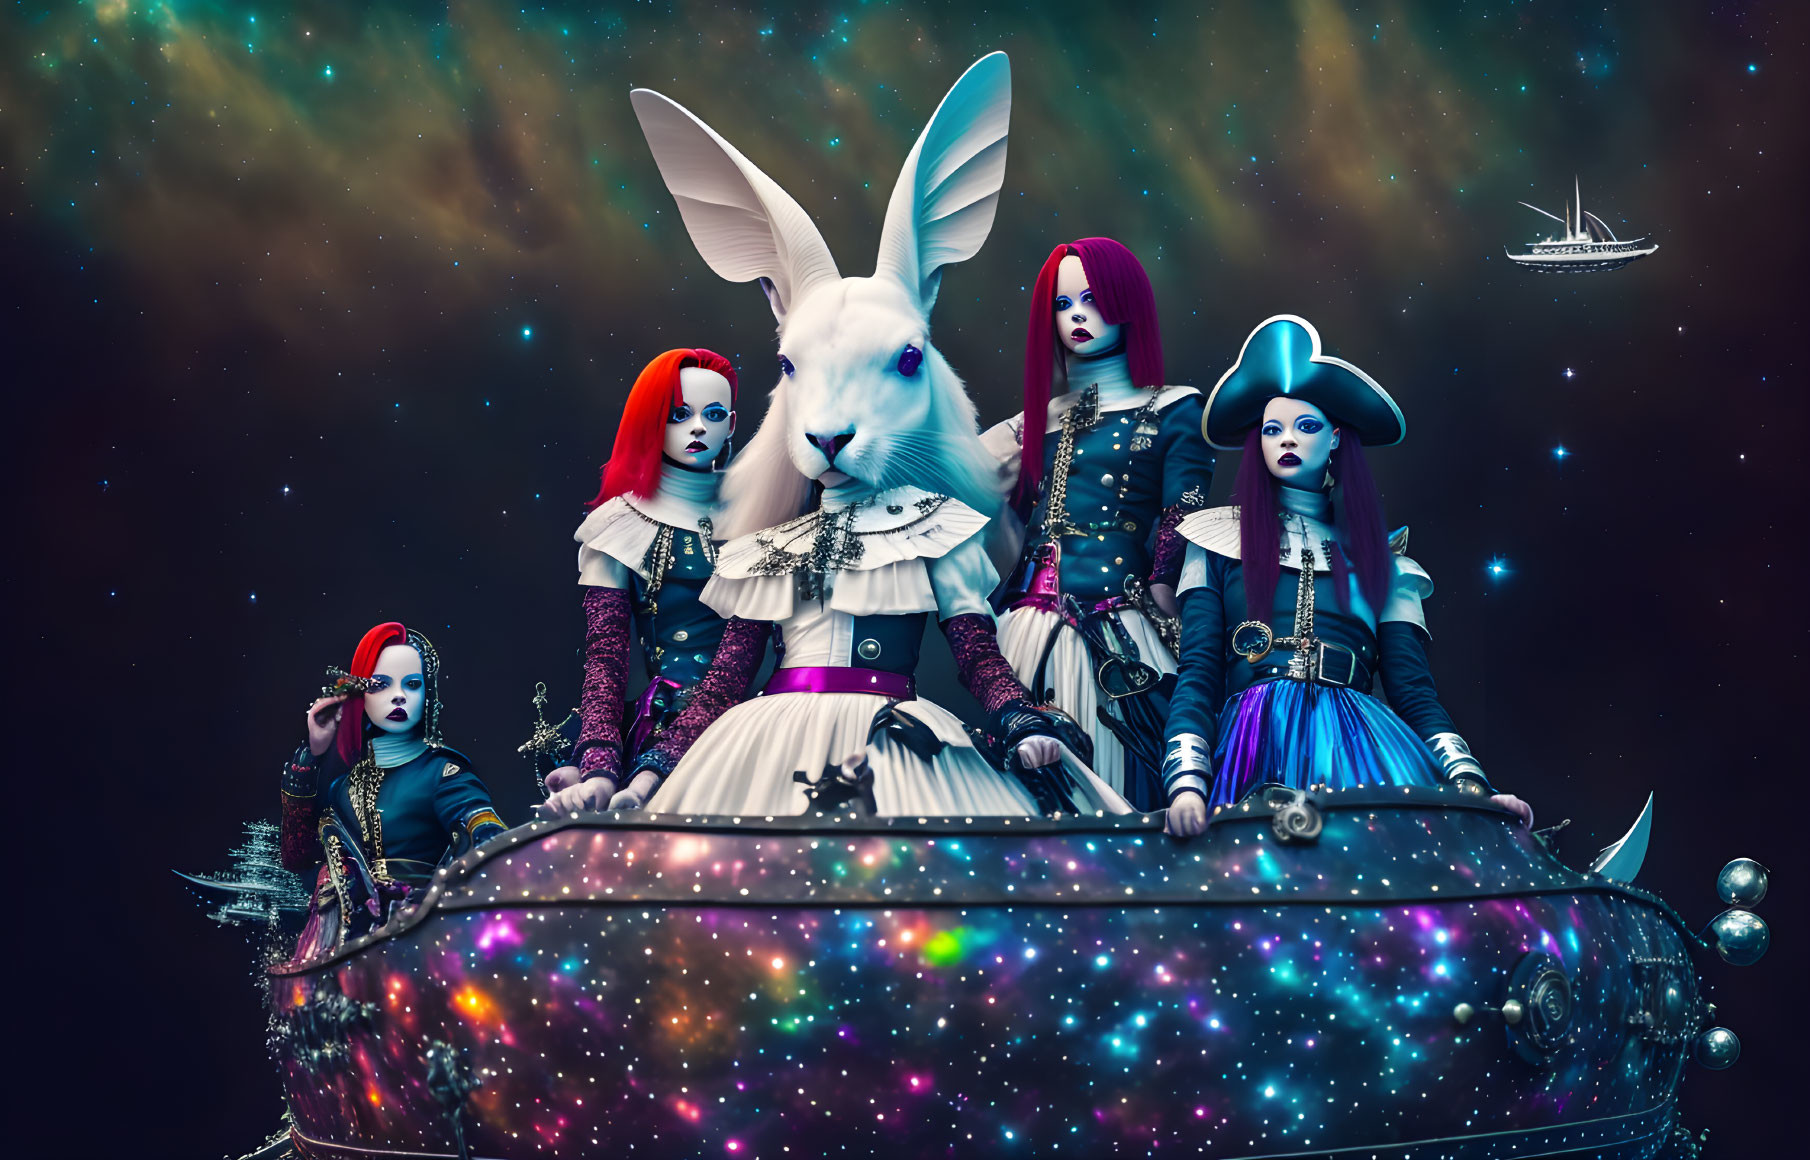 Surreal cosmic scene with individuals in elaborate costumes